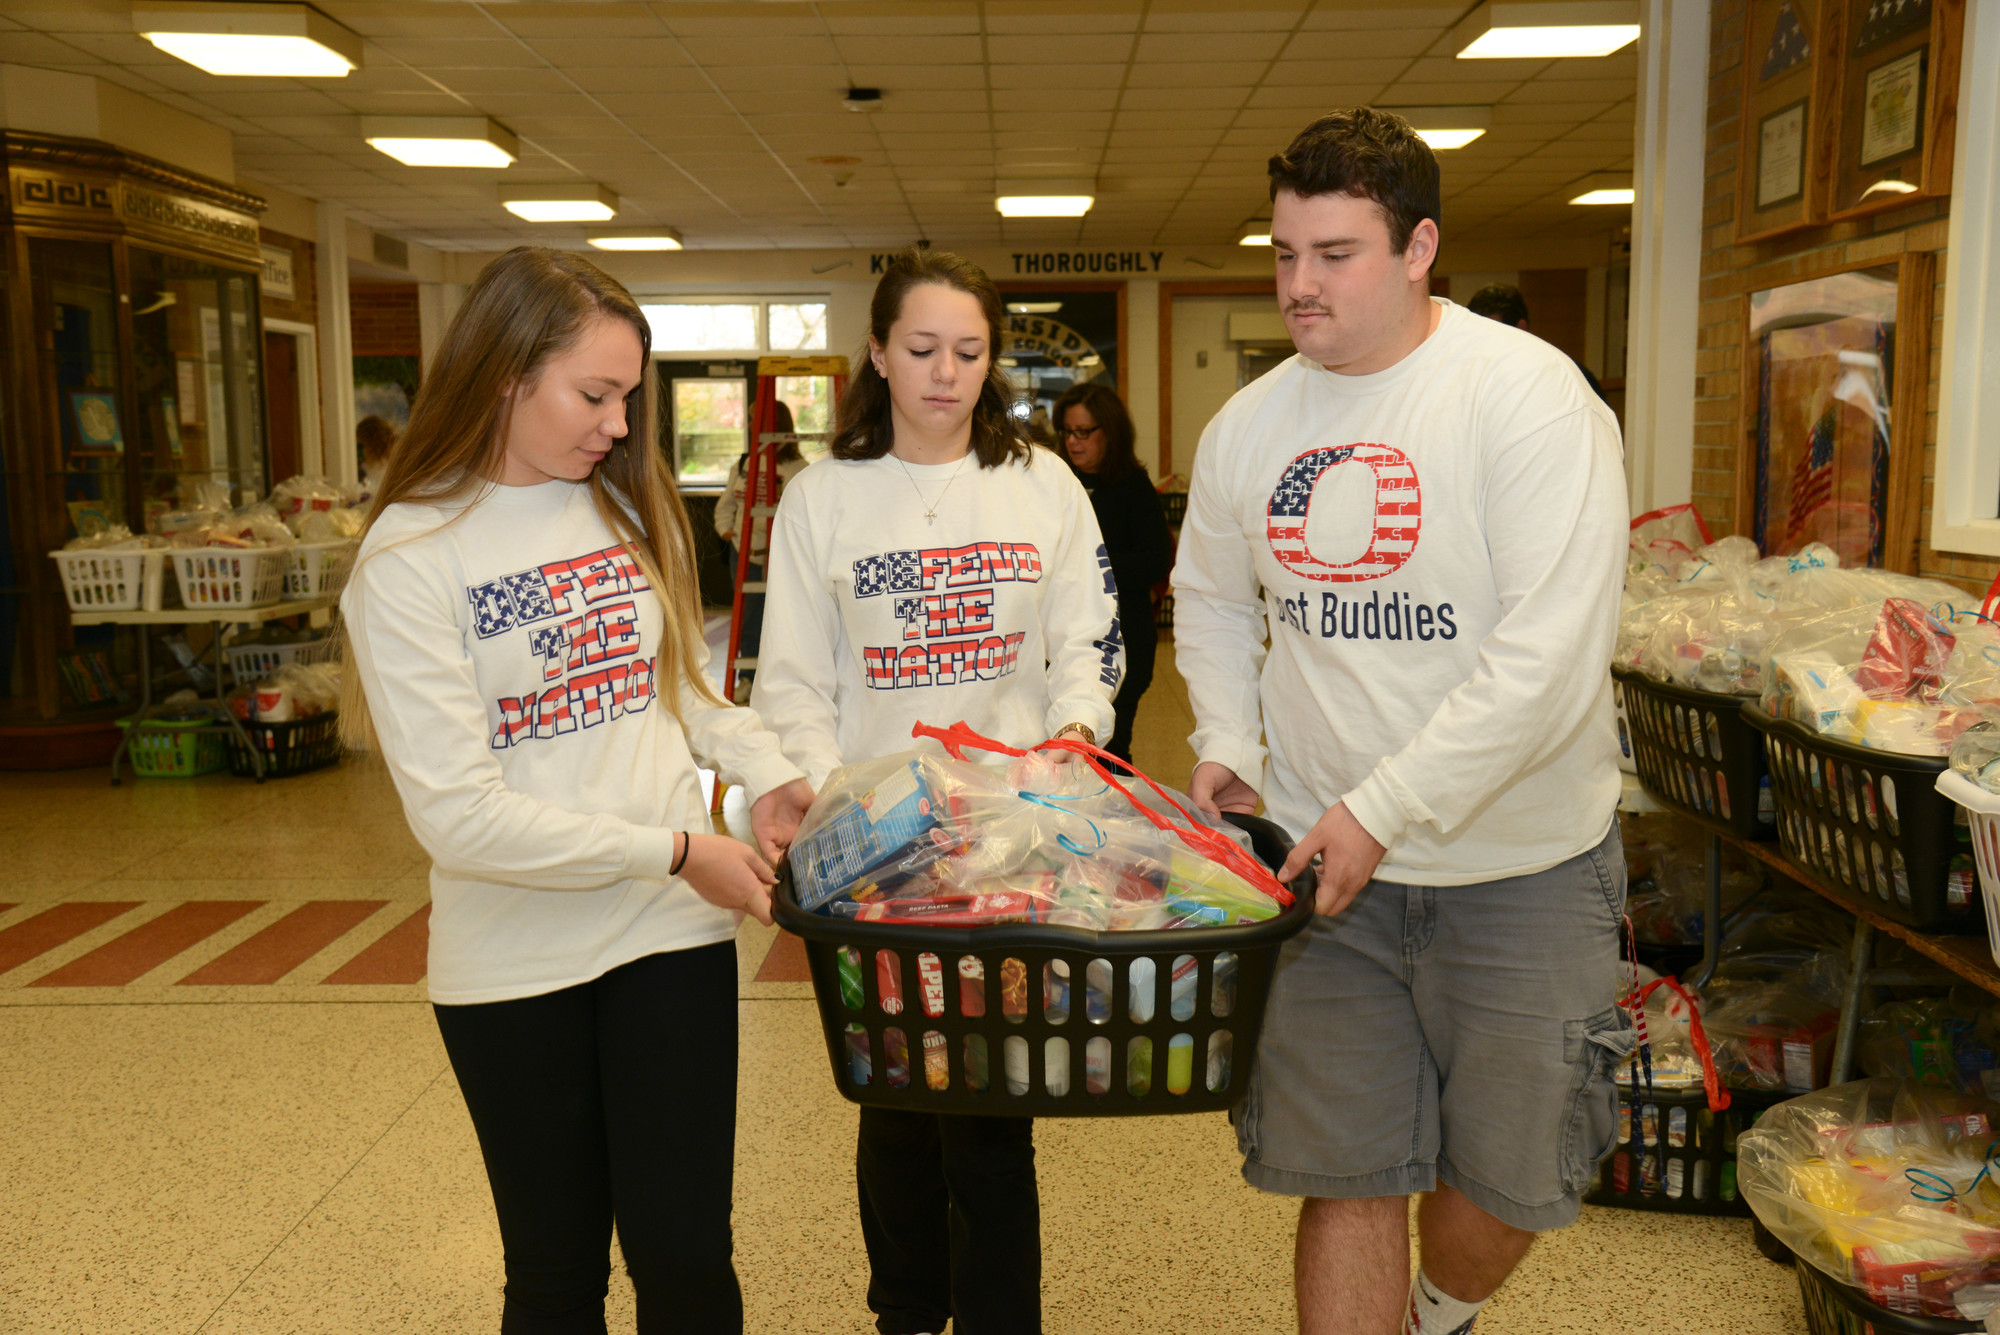 Jessica Schwartz, Jessica Scandiffio, and Matt Kear arranging baskets for delivery at the OHS turkey Shoot.